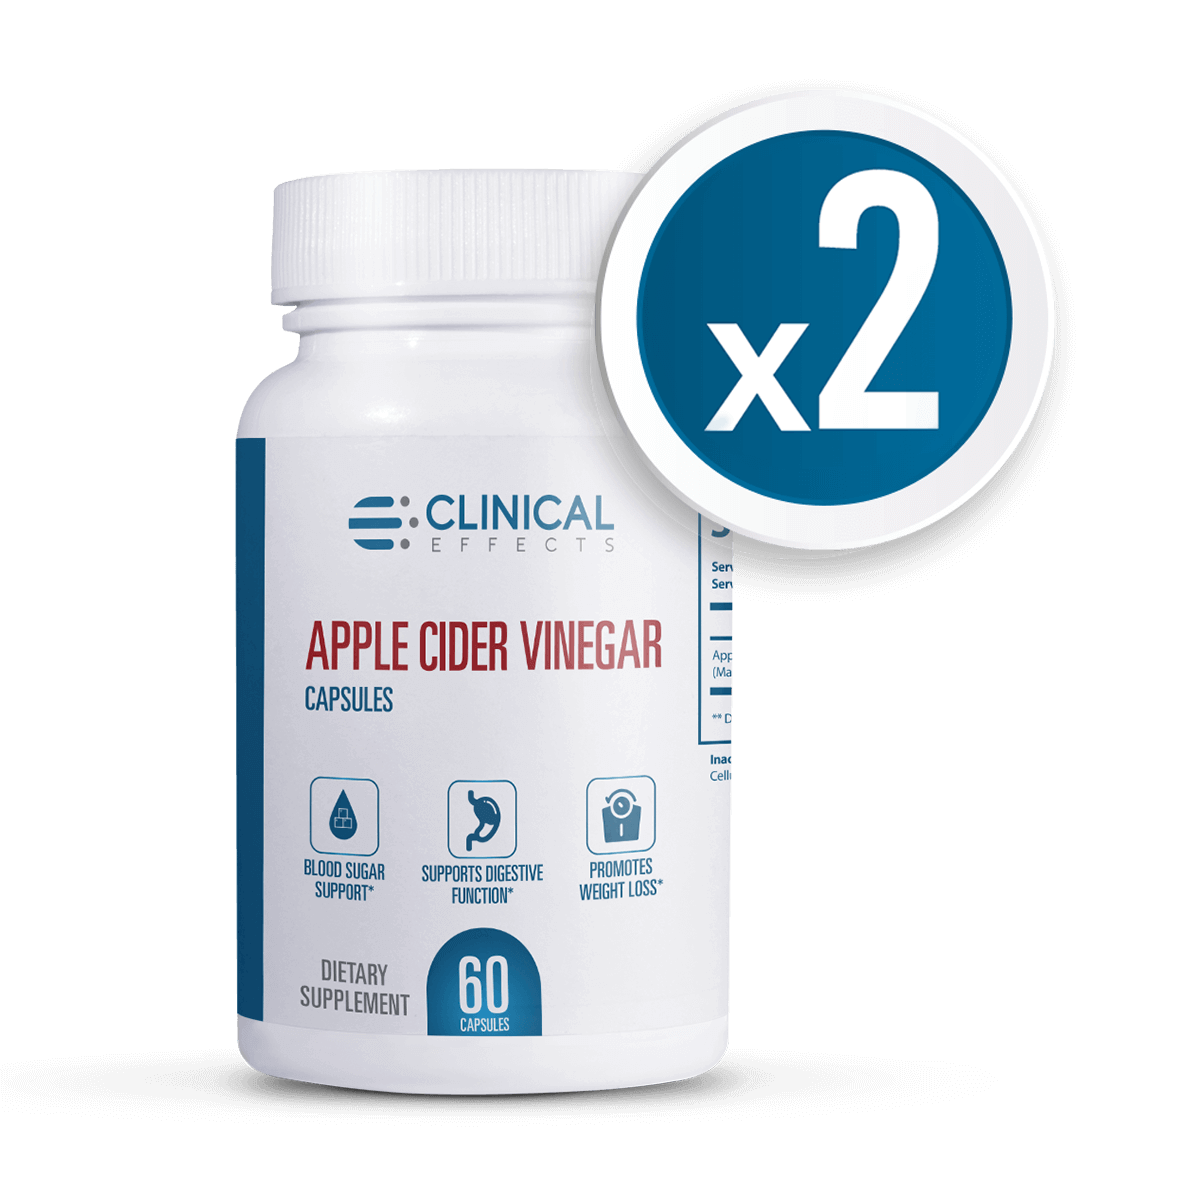 Picture of Shaker, Bottle with text x2 CLINICAL EFFECTS Serv APPLE CIDER VINEGAR App (Ma CAPSULES BL...